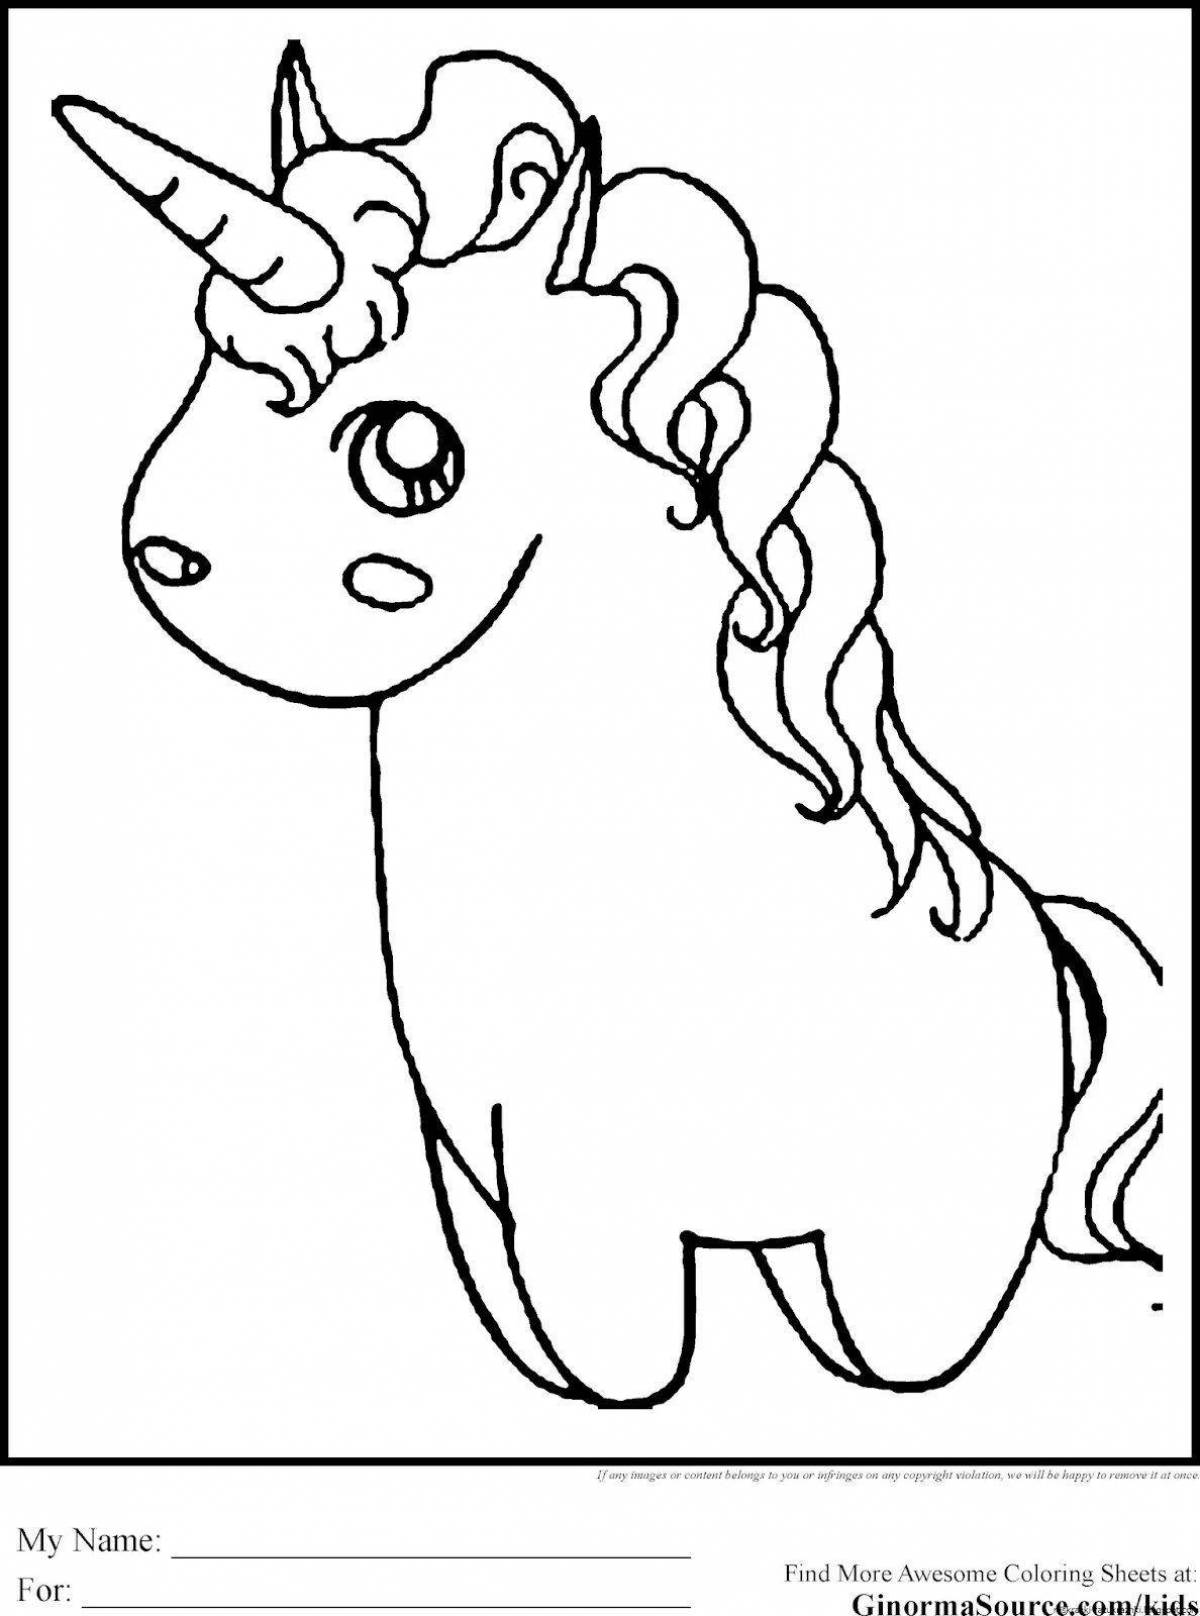 Excellent coloring how to draw a unicorn